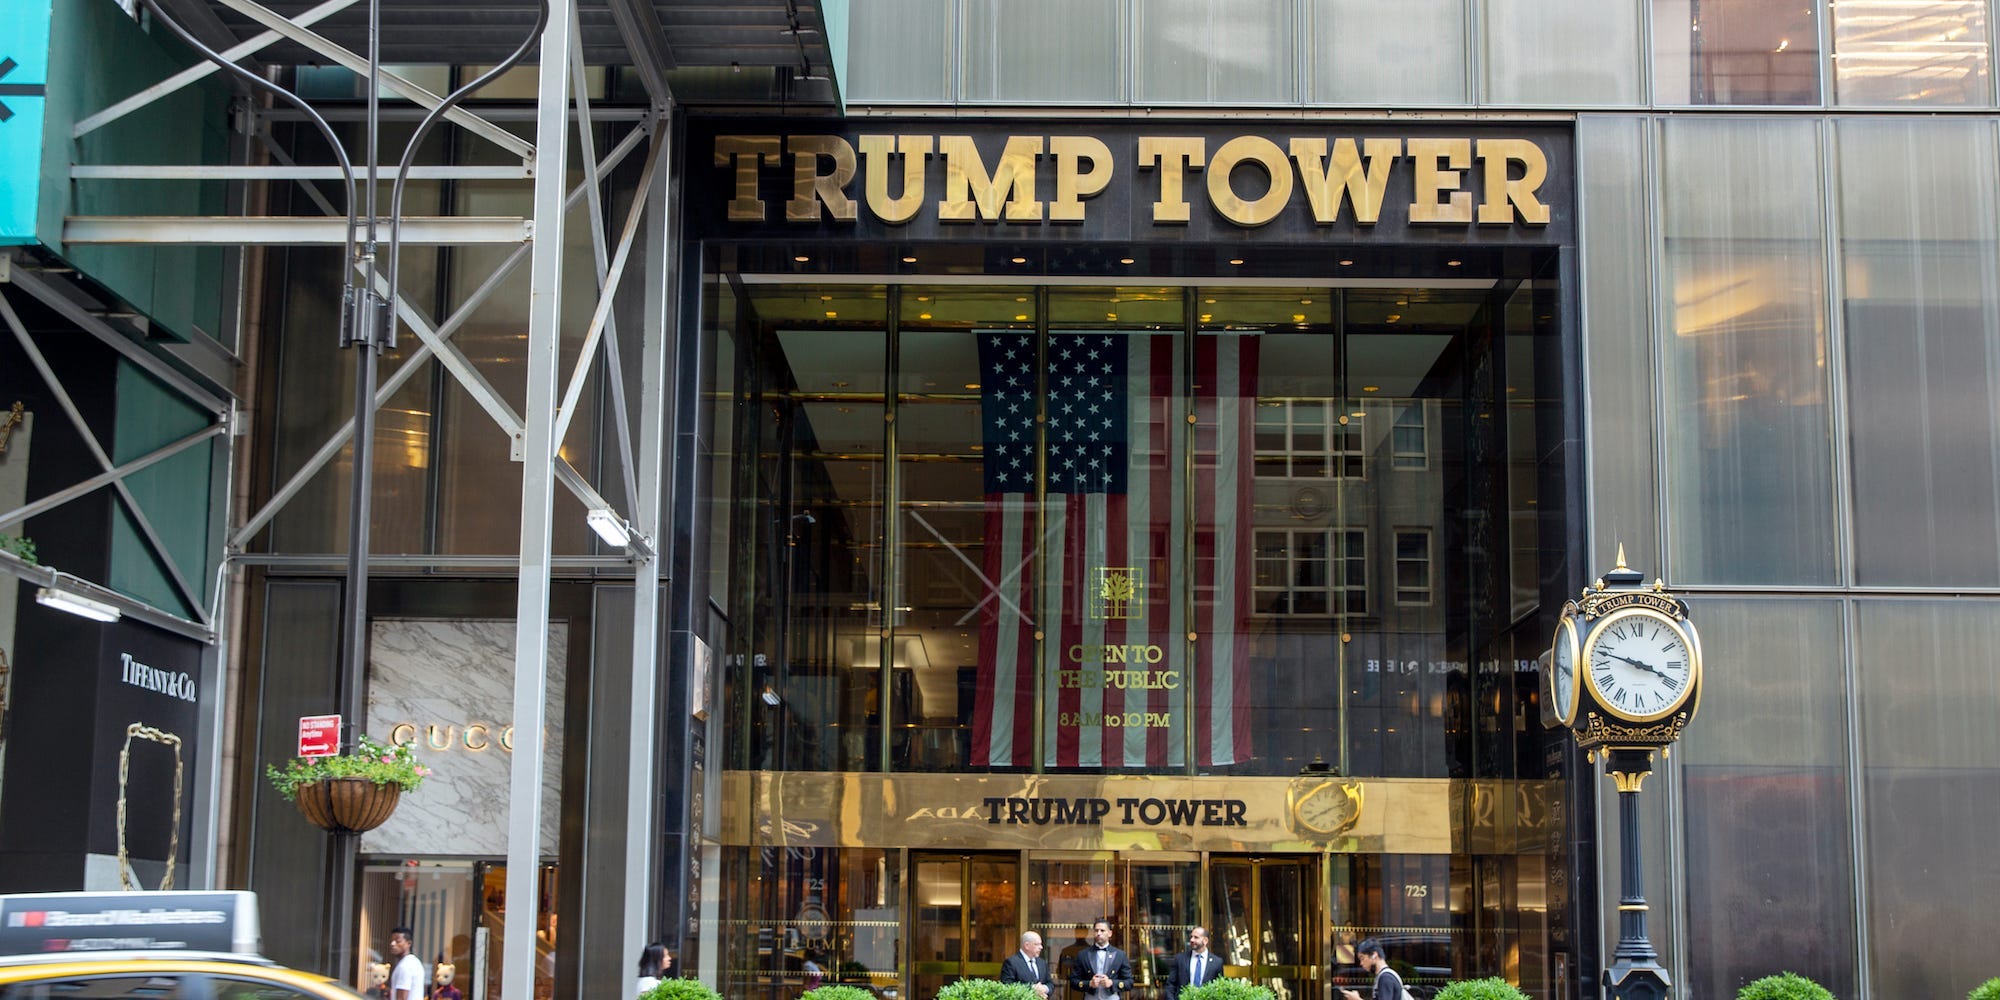 A taxi passes by Trump Tower, the headquarters of the Trump Organization, in New York City on Wednesday, July 14, 2021